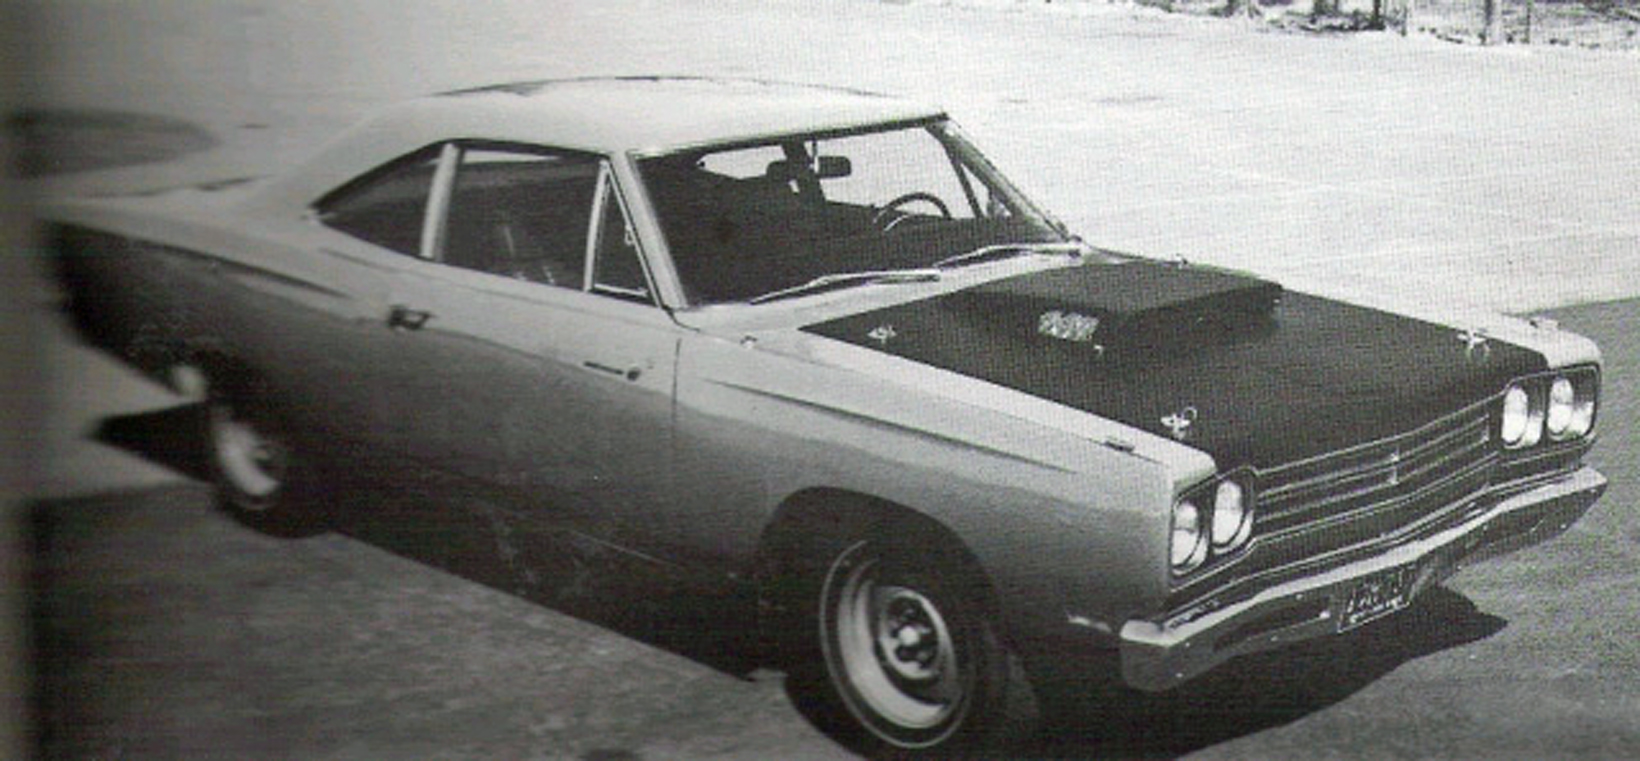 Attached picture 6bbl rr 1969 w body color rims and no antenna copyx.jpg